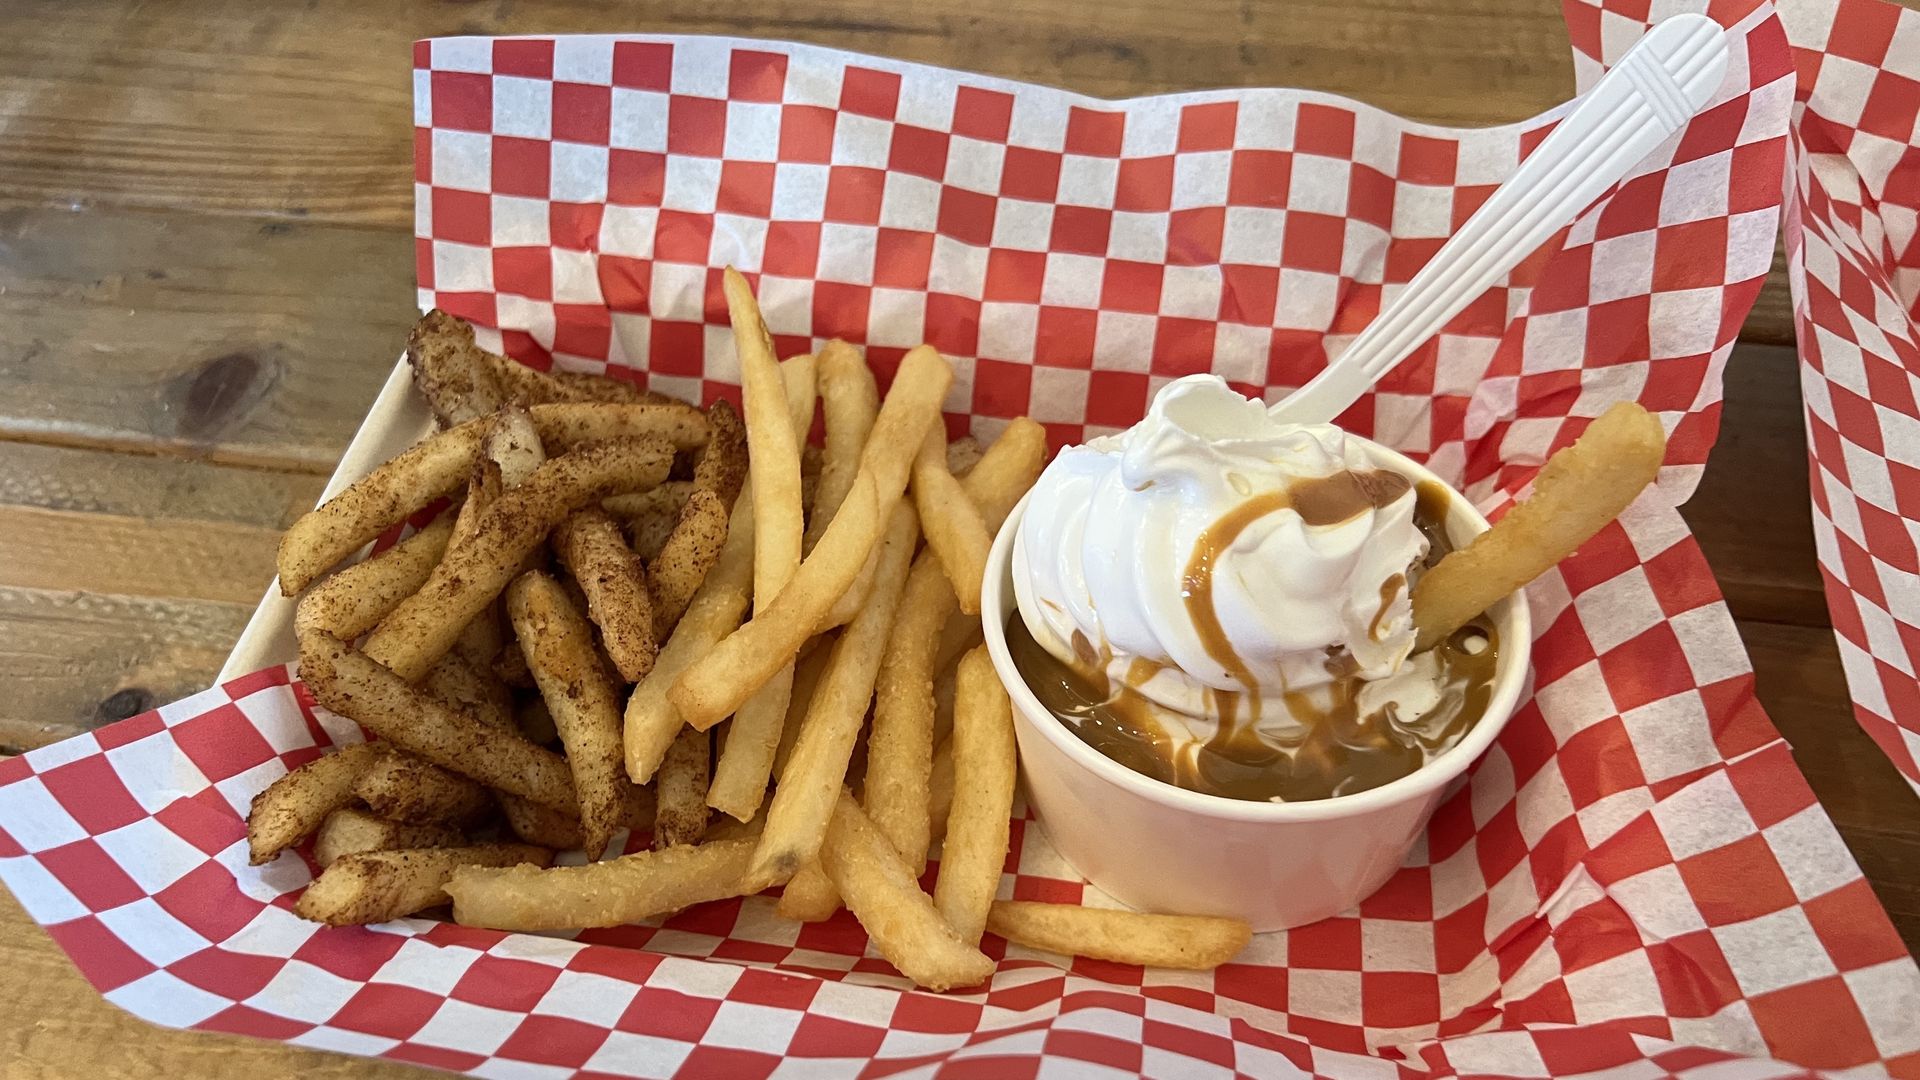 Ice cream and fries from Fryce Cream